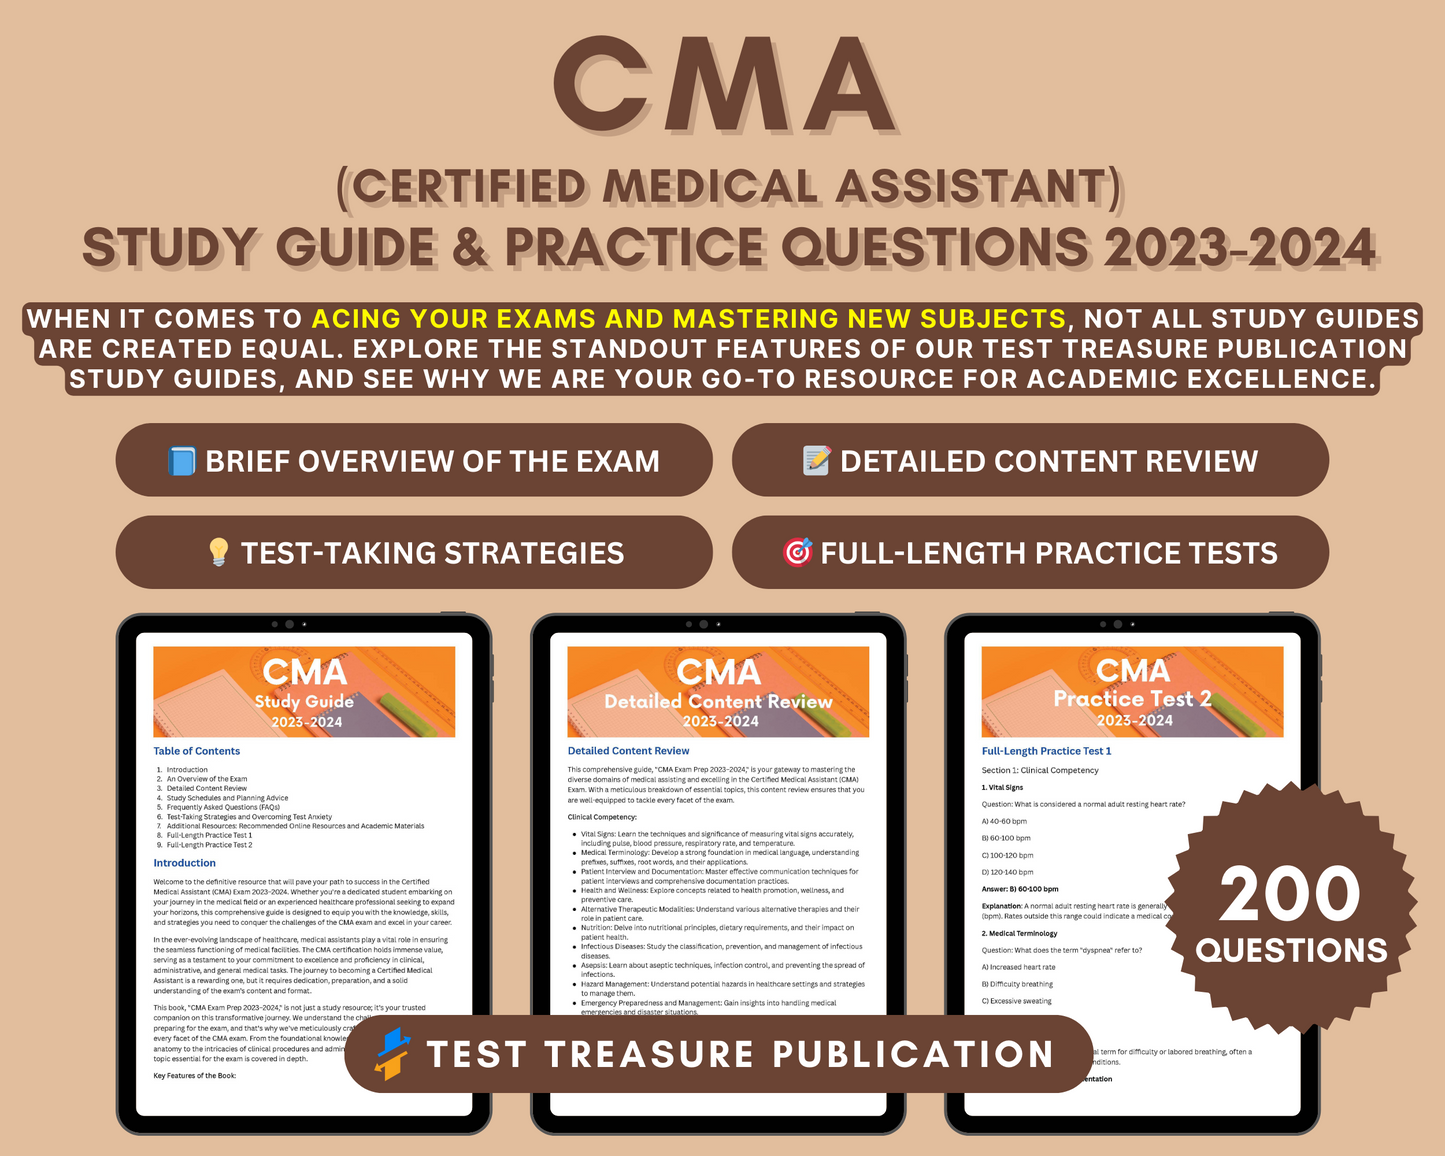 CMA Study Guide 2023-2024: In-Depth Content Review, Practice Tests & Exam Strategies for Medical Assistant Exam - Clinical, Admin, and More